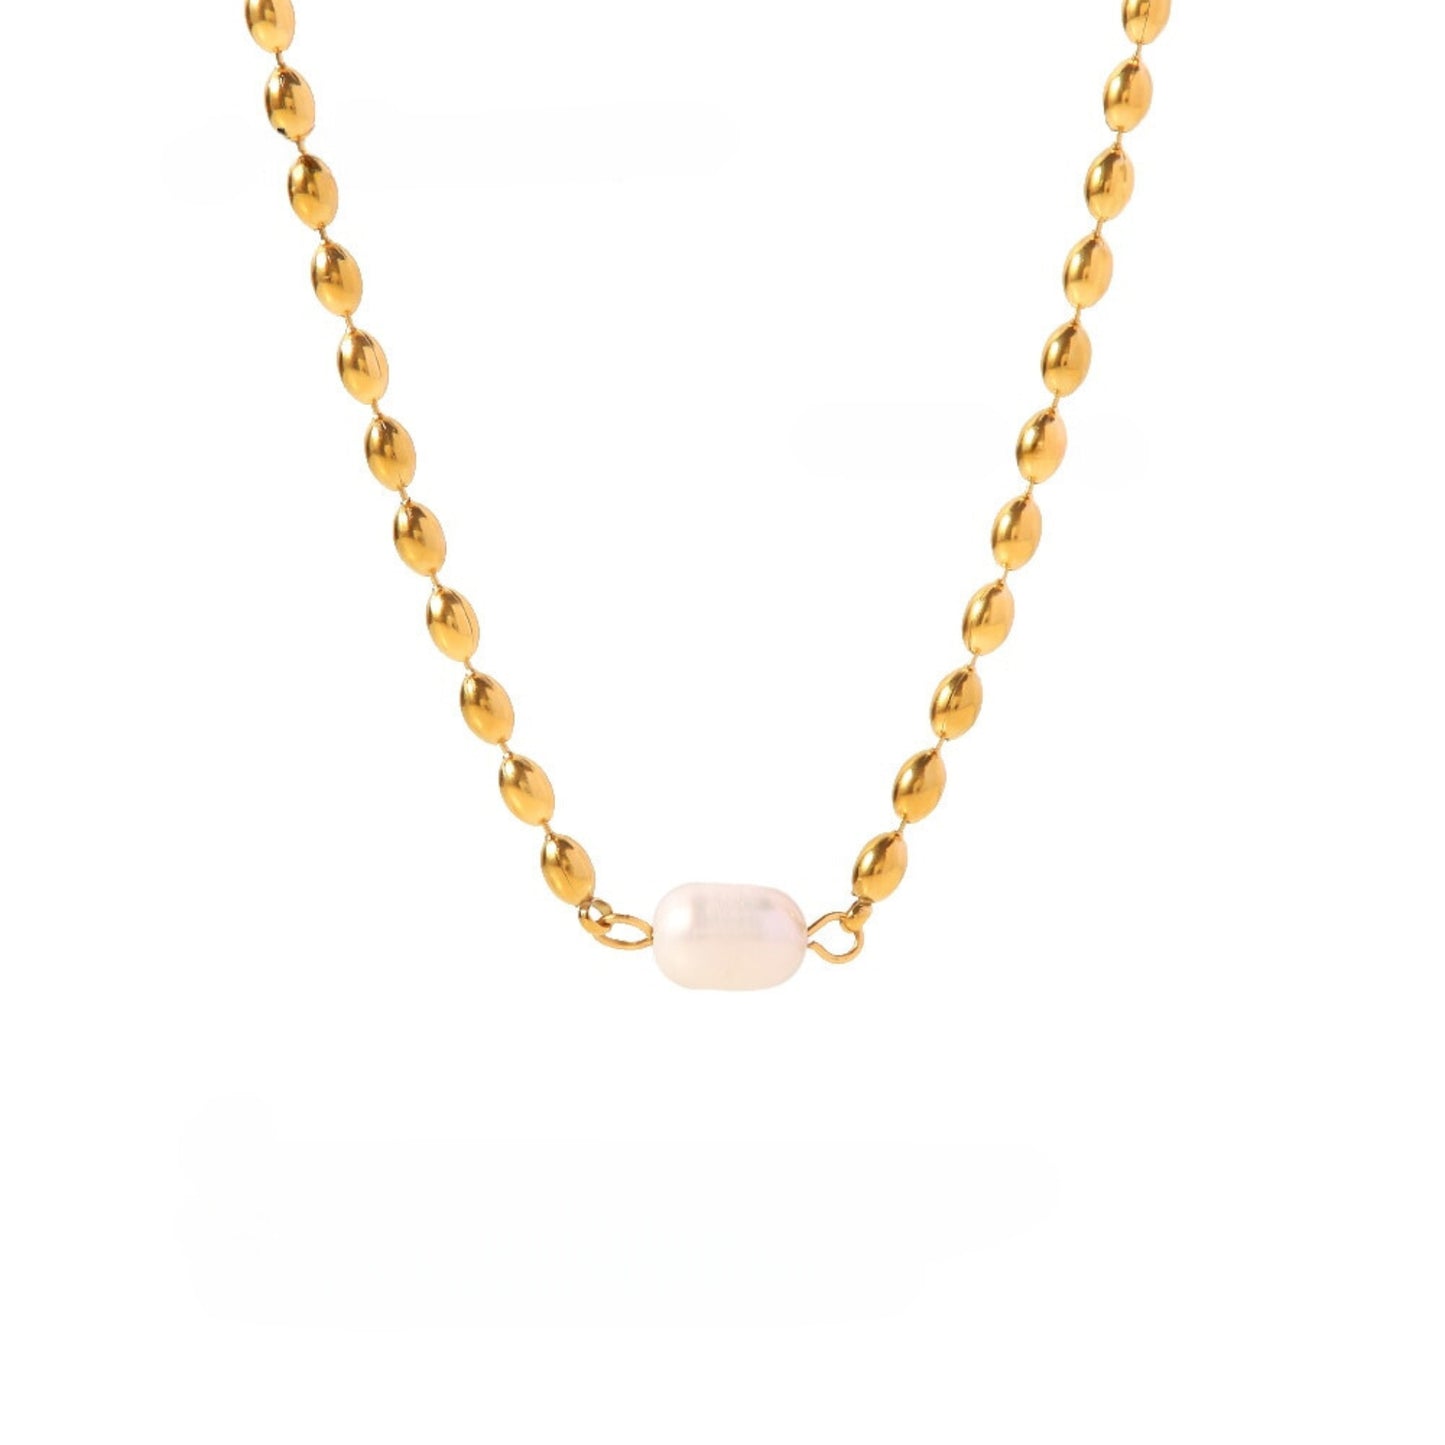 18K Gold Plated Stainless Steel Hypoallergenic Waterproof Tarnish Free Pearl Droplet Necklaces The Aura